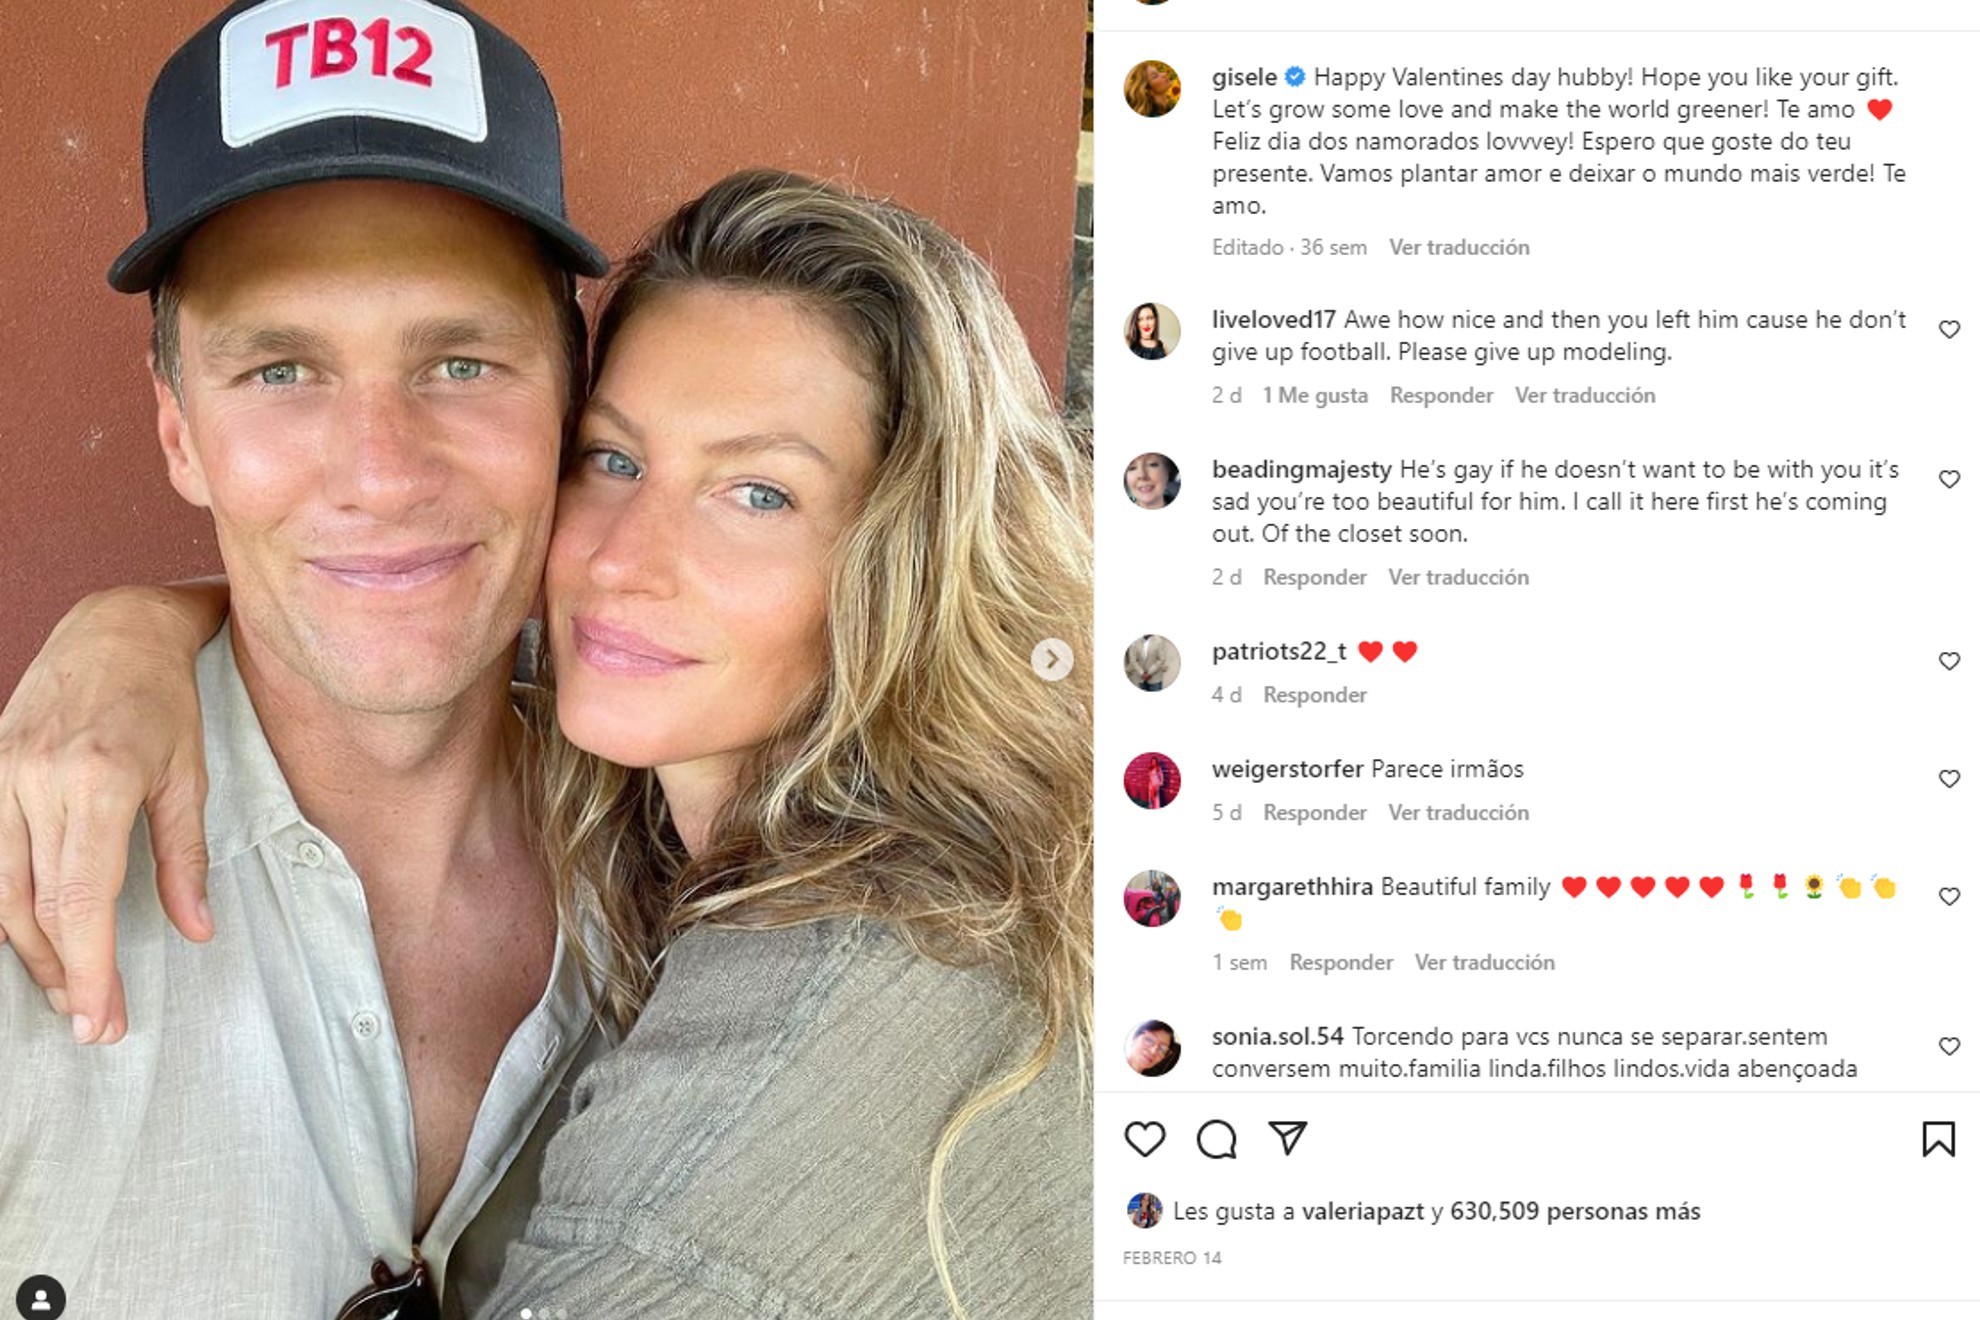 Gisele Bündchen's silence on social media: what were her last posts and what do they tell us about Tom Brady?